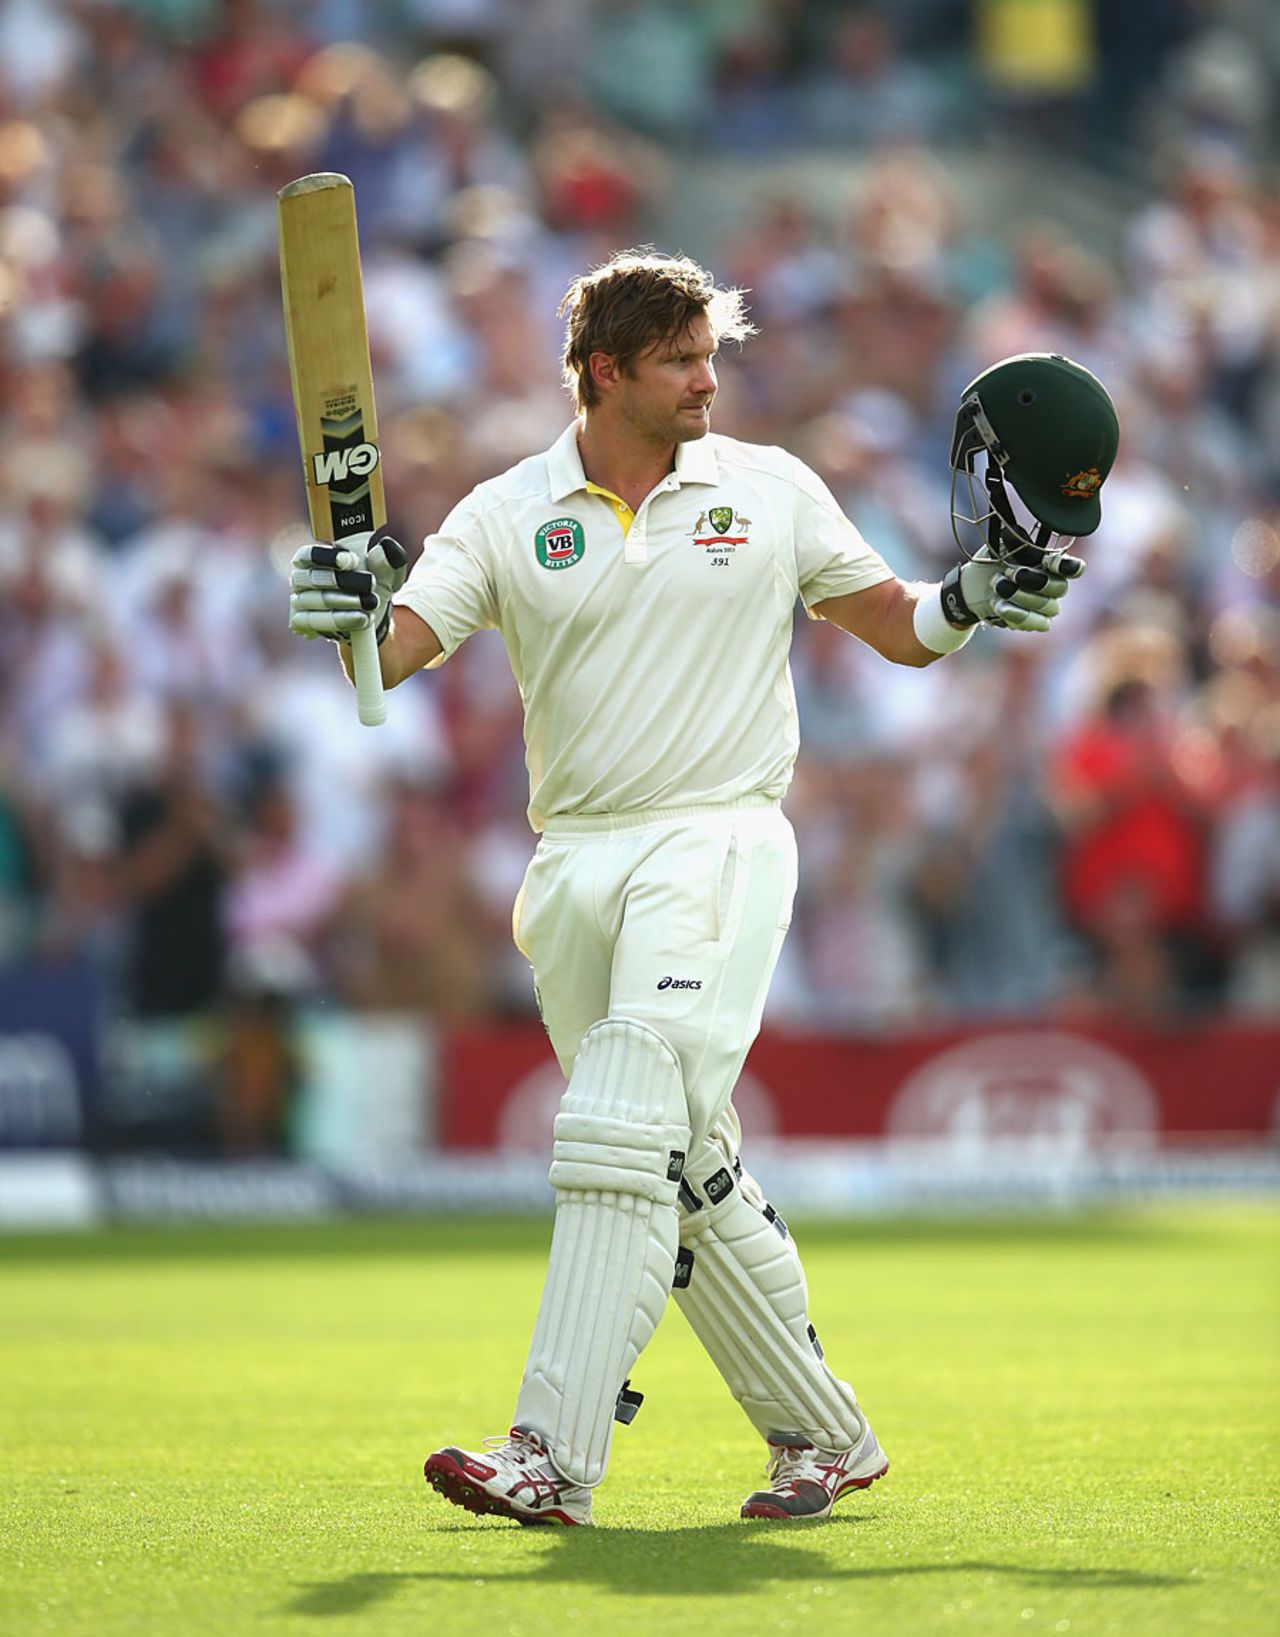 Shane Watson acknowledges the crowd after falling for 176, England v Australia, 5th Investec Test, The Oval, 1st day, August 21, 2013